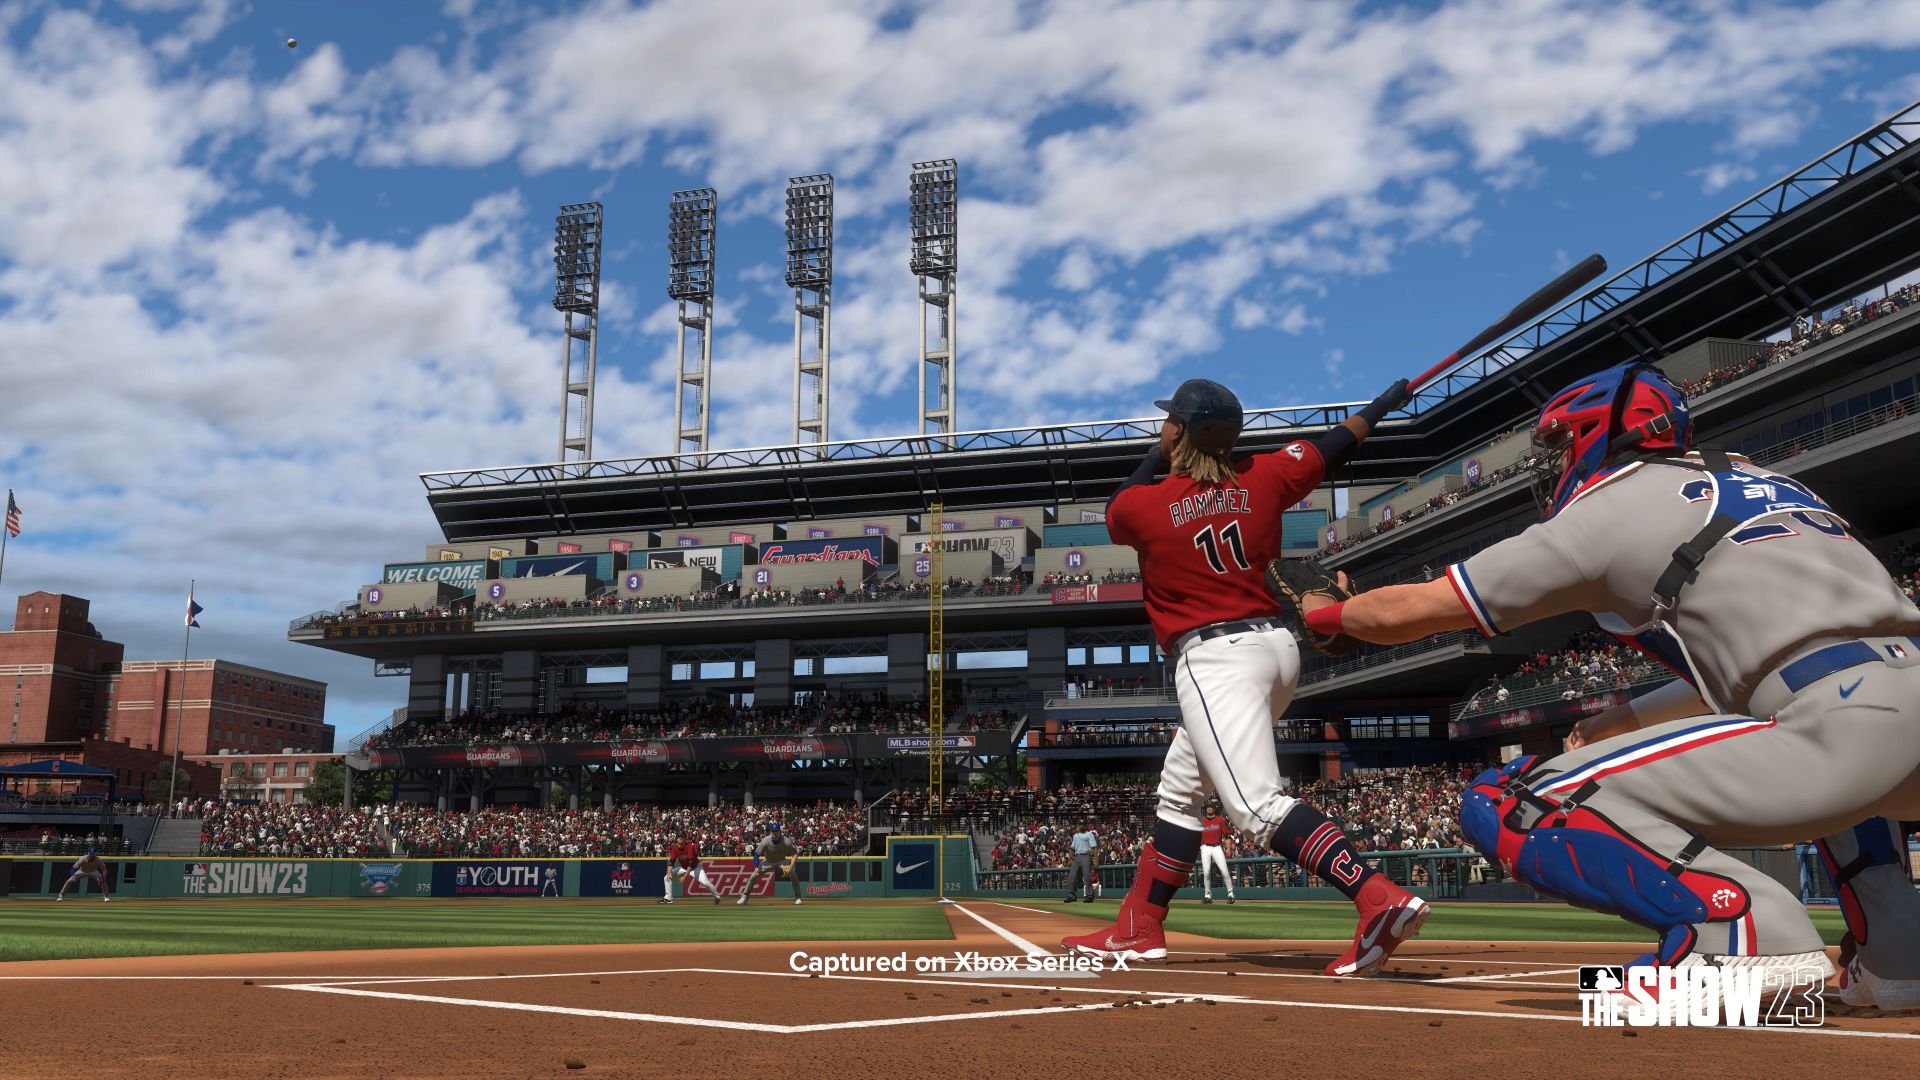 How to Equip Custom Jerseys in MLB The Show 23? Details here - News